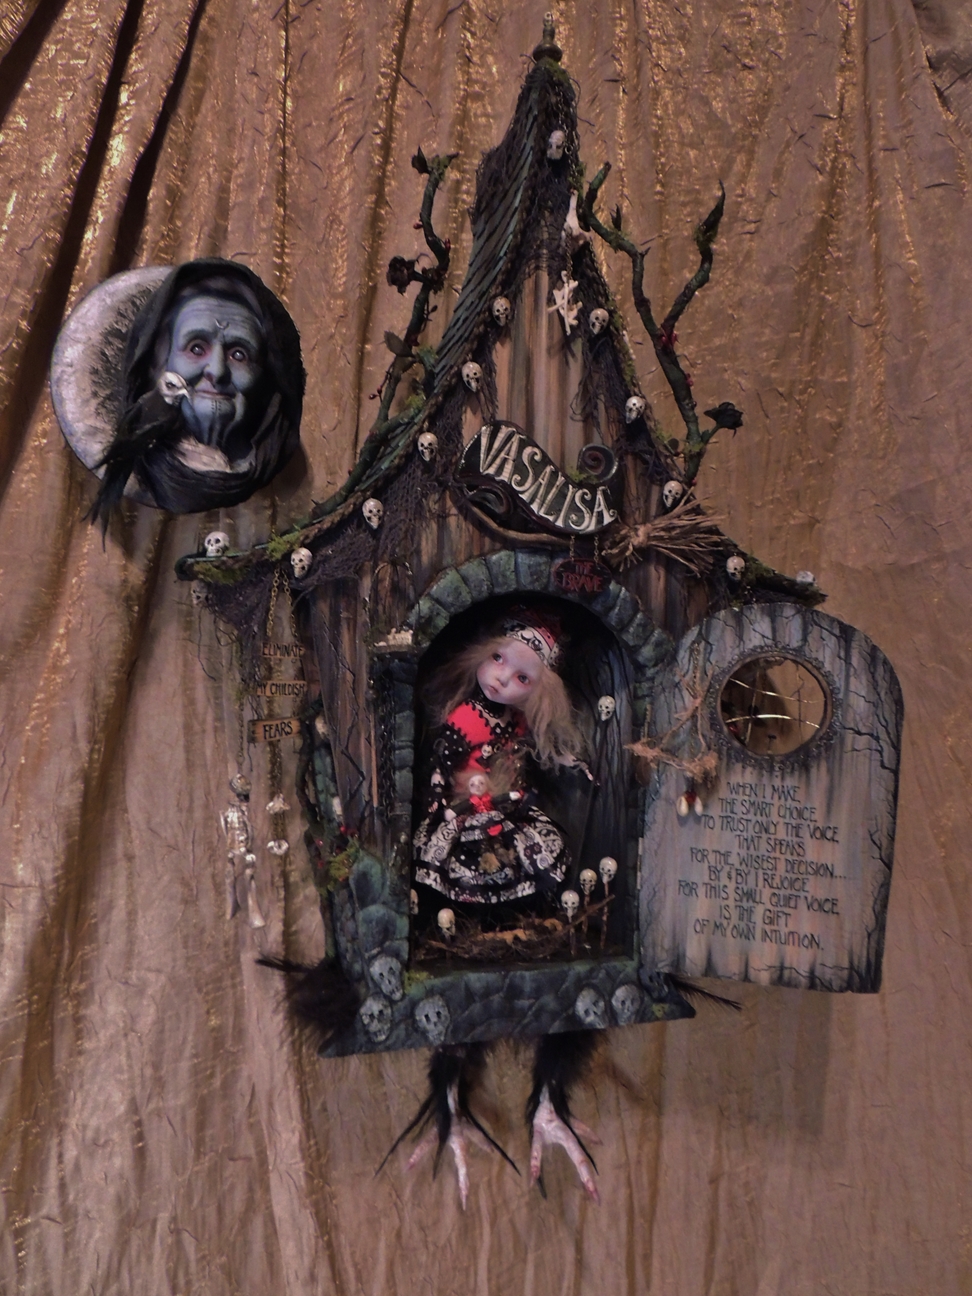 hand sculpted mini house with bird feet. Behind the door brave VasaLisa looks out for BabaYaga folk art mixed media assemblage